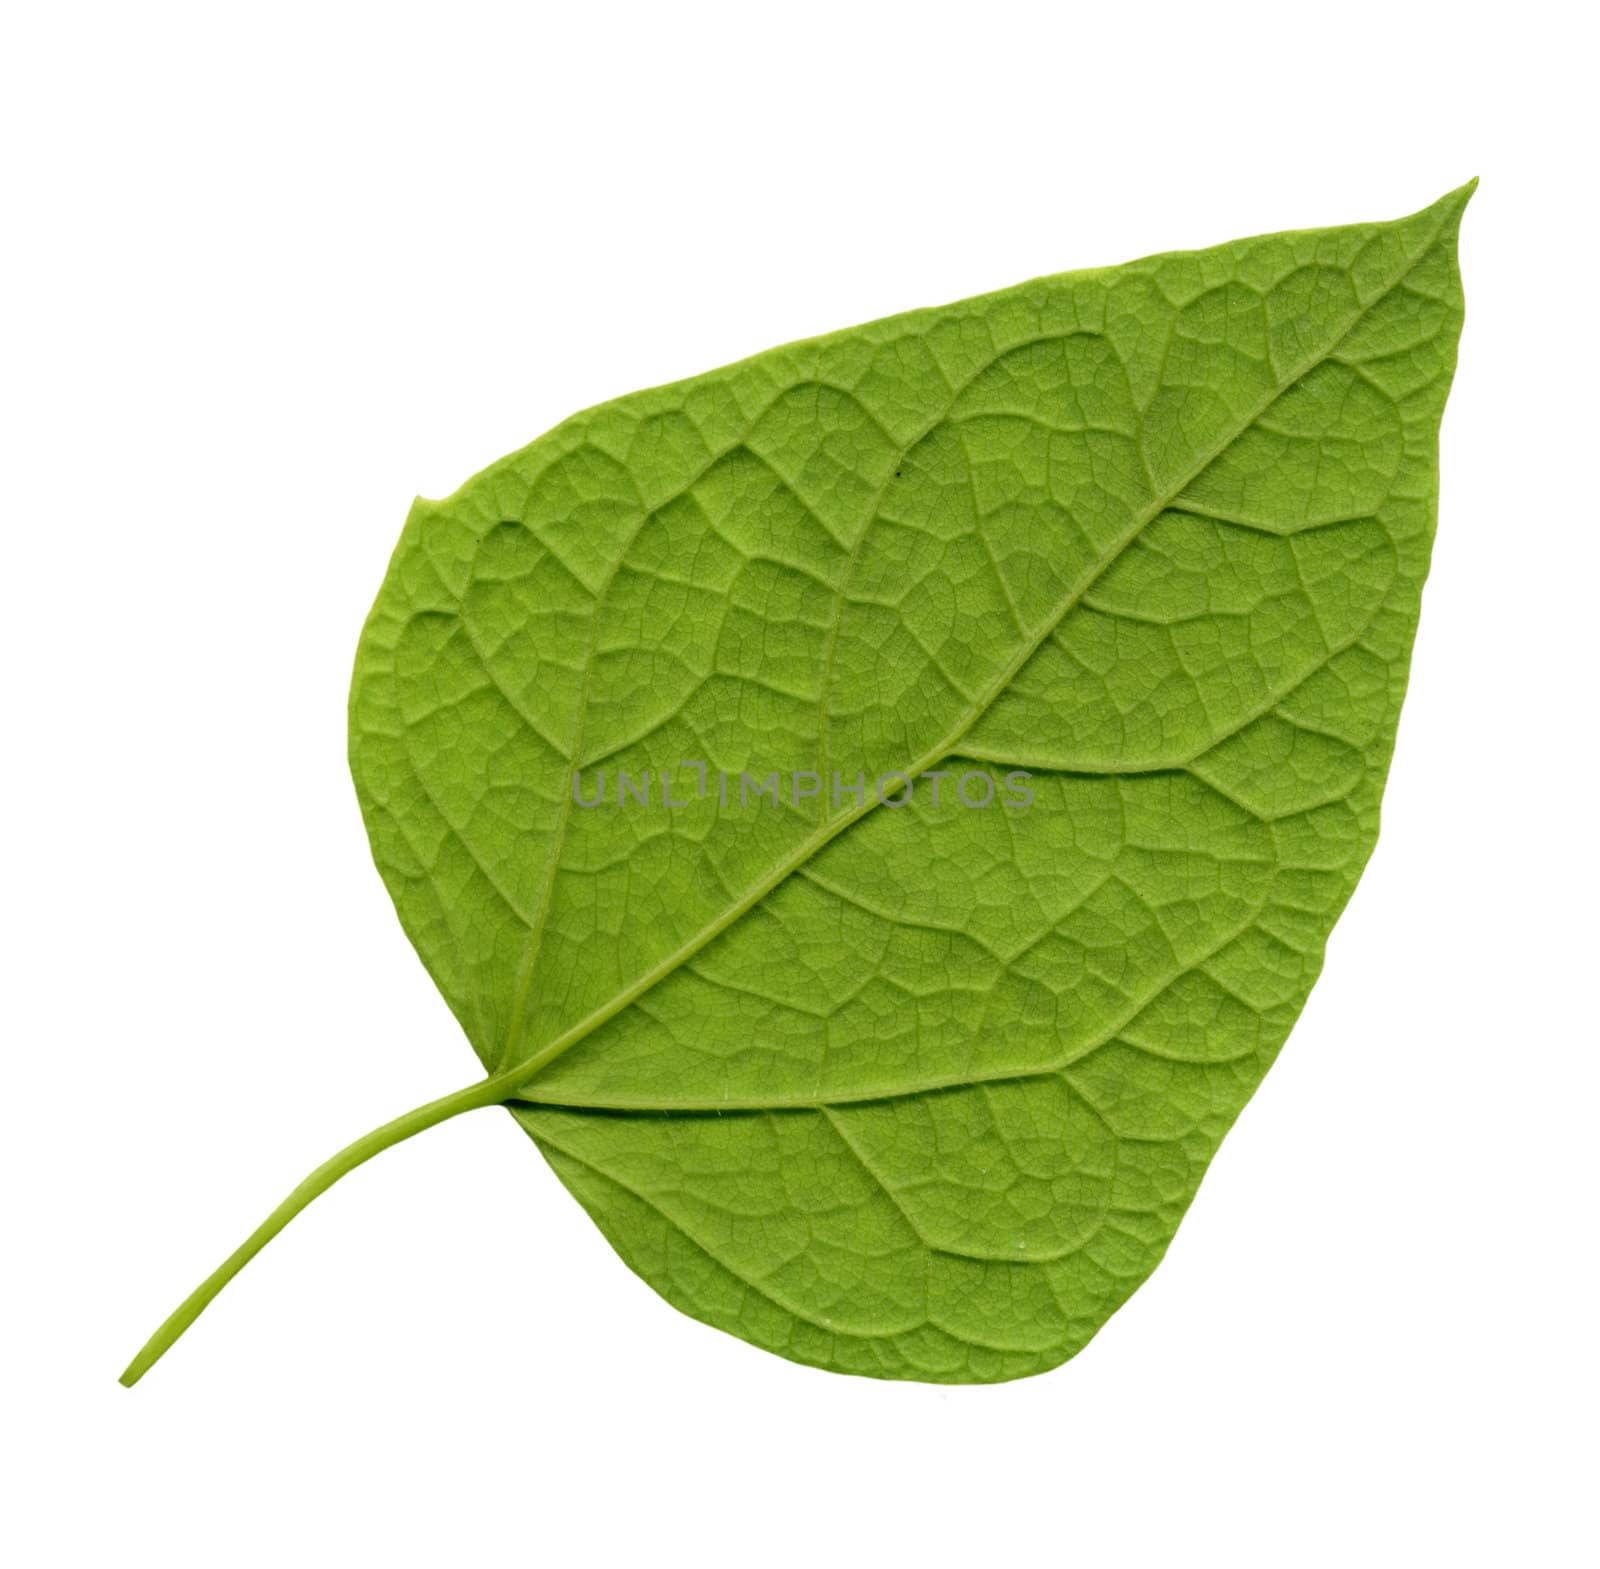 High definition picture of a green leaf isolated on white